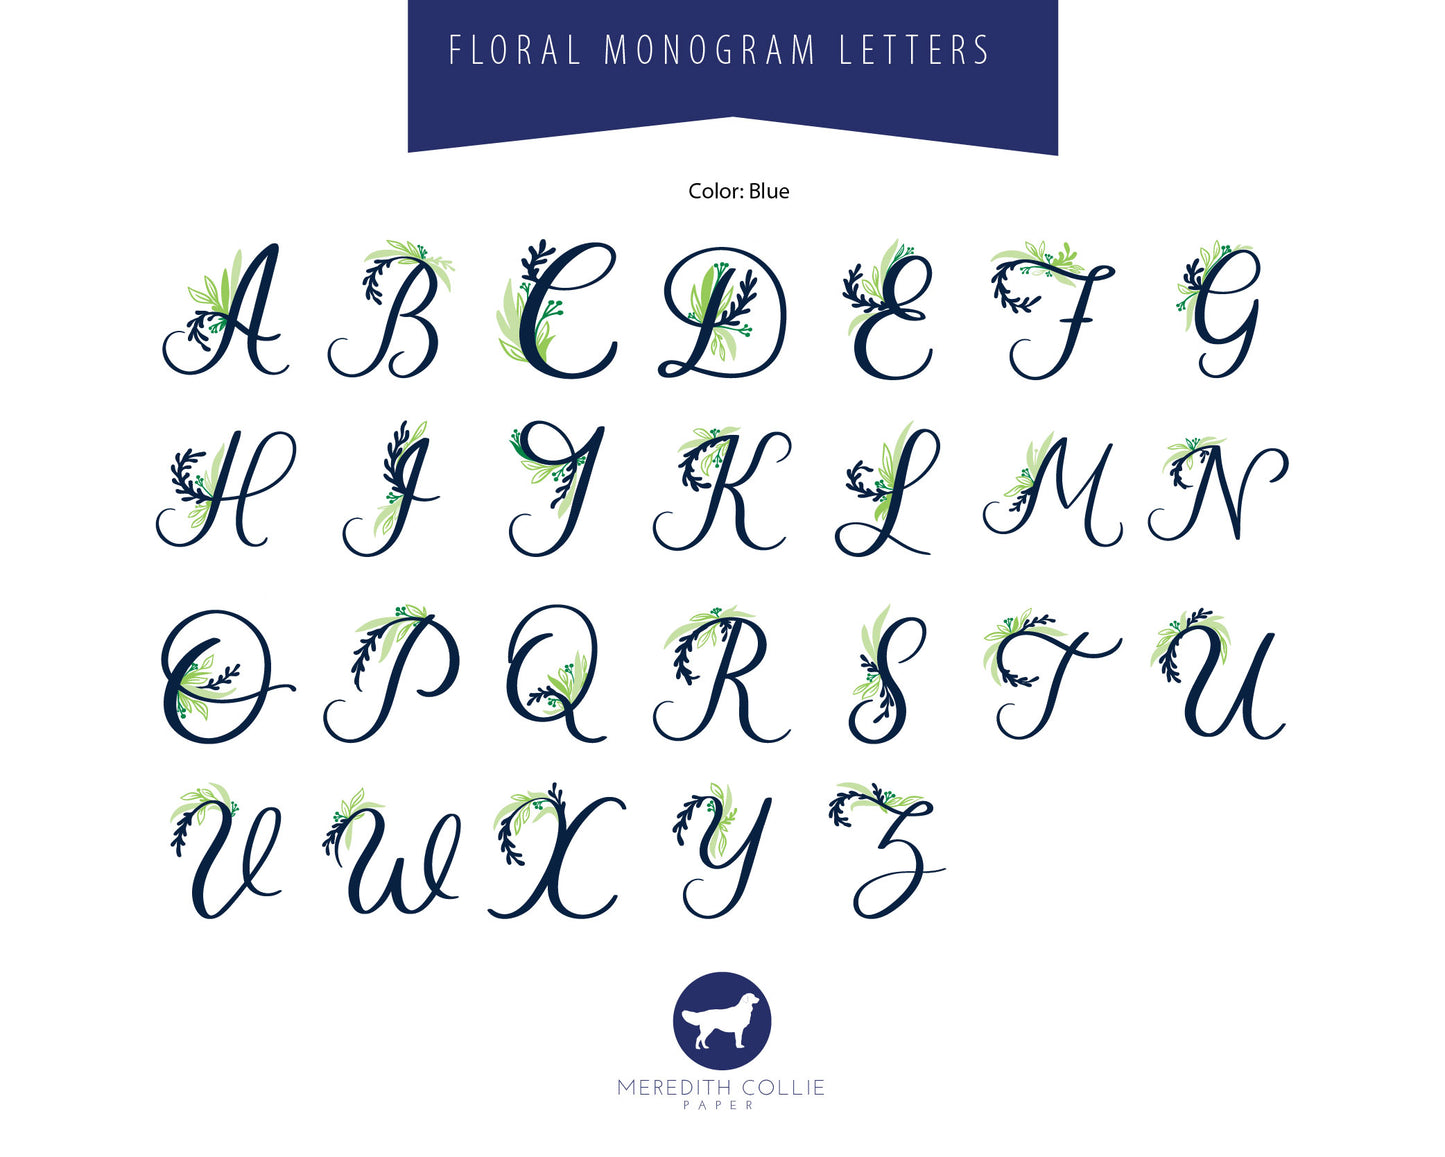 Floral Monogram Letters Blue / Meredith Collie Paper